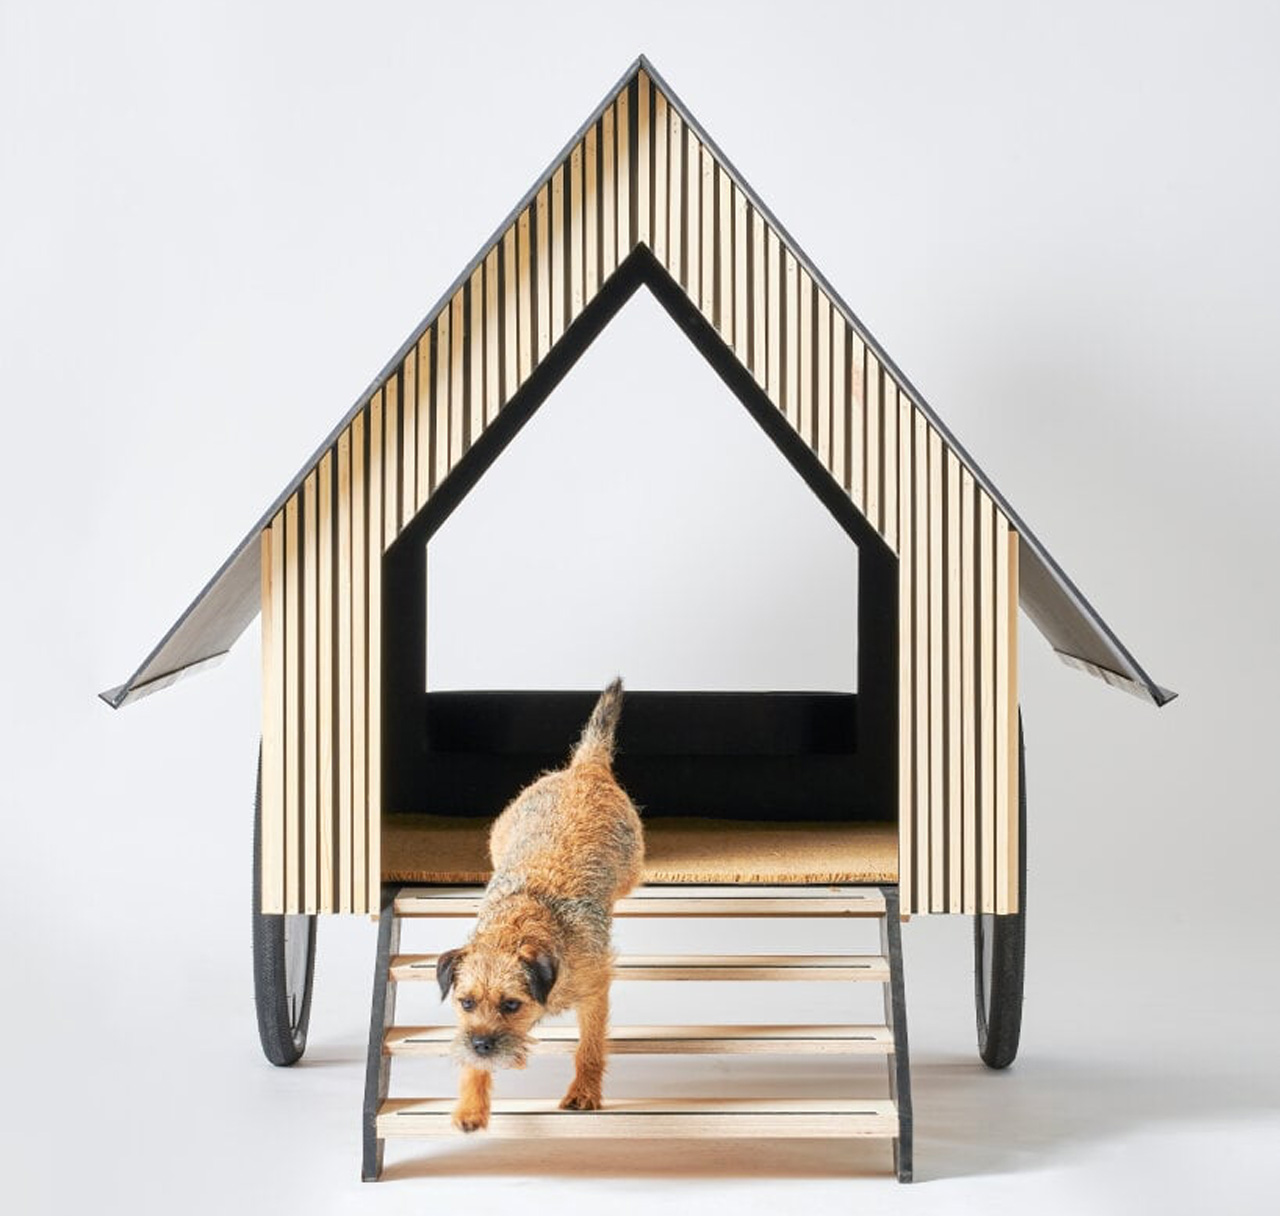 Wooden hut on wheels is the ultimate dog house to help doggos live a nomadic life on the go